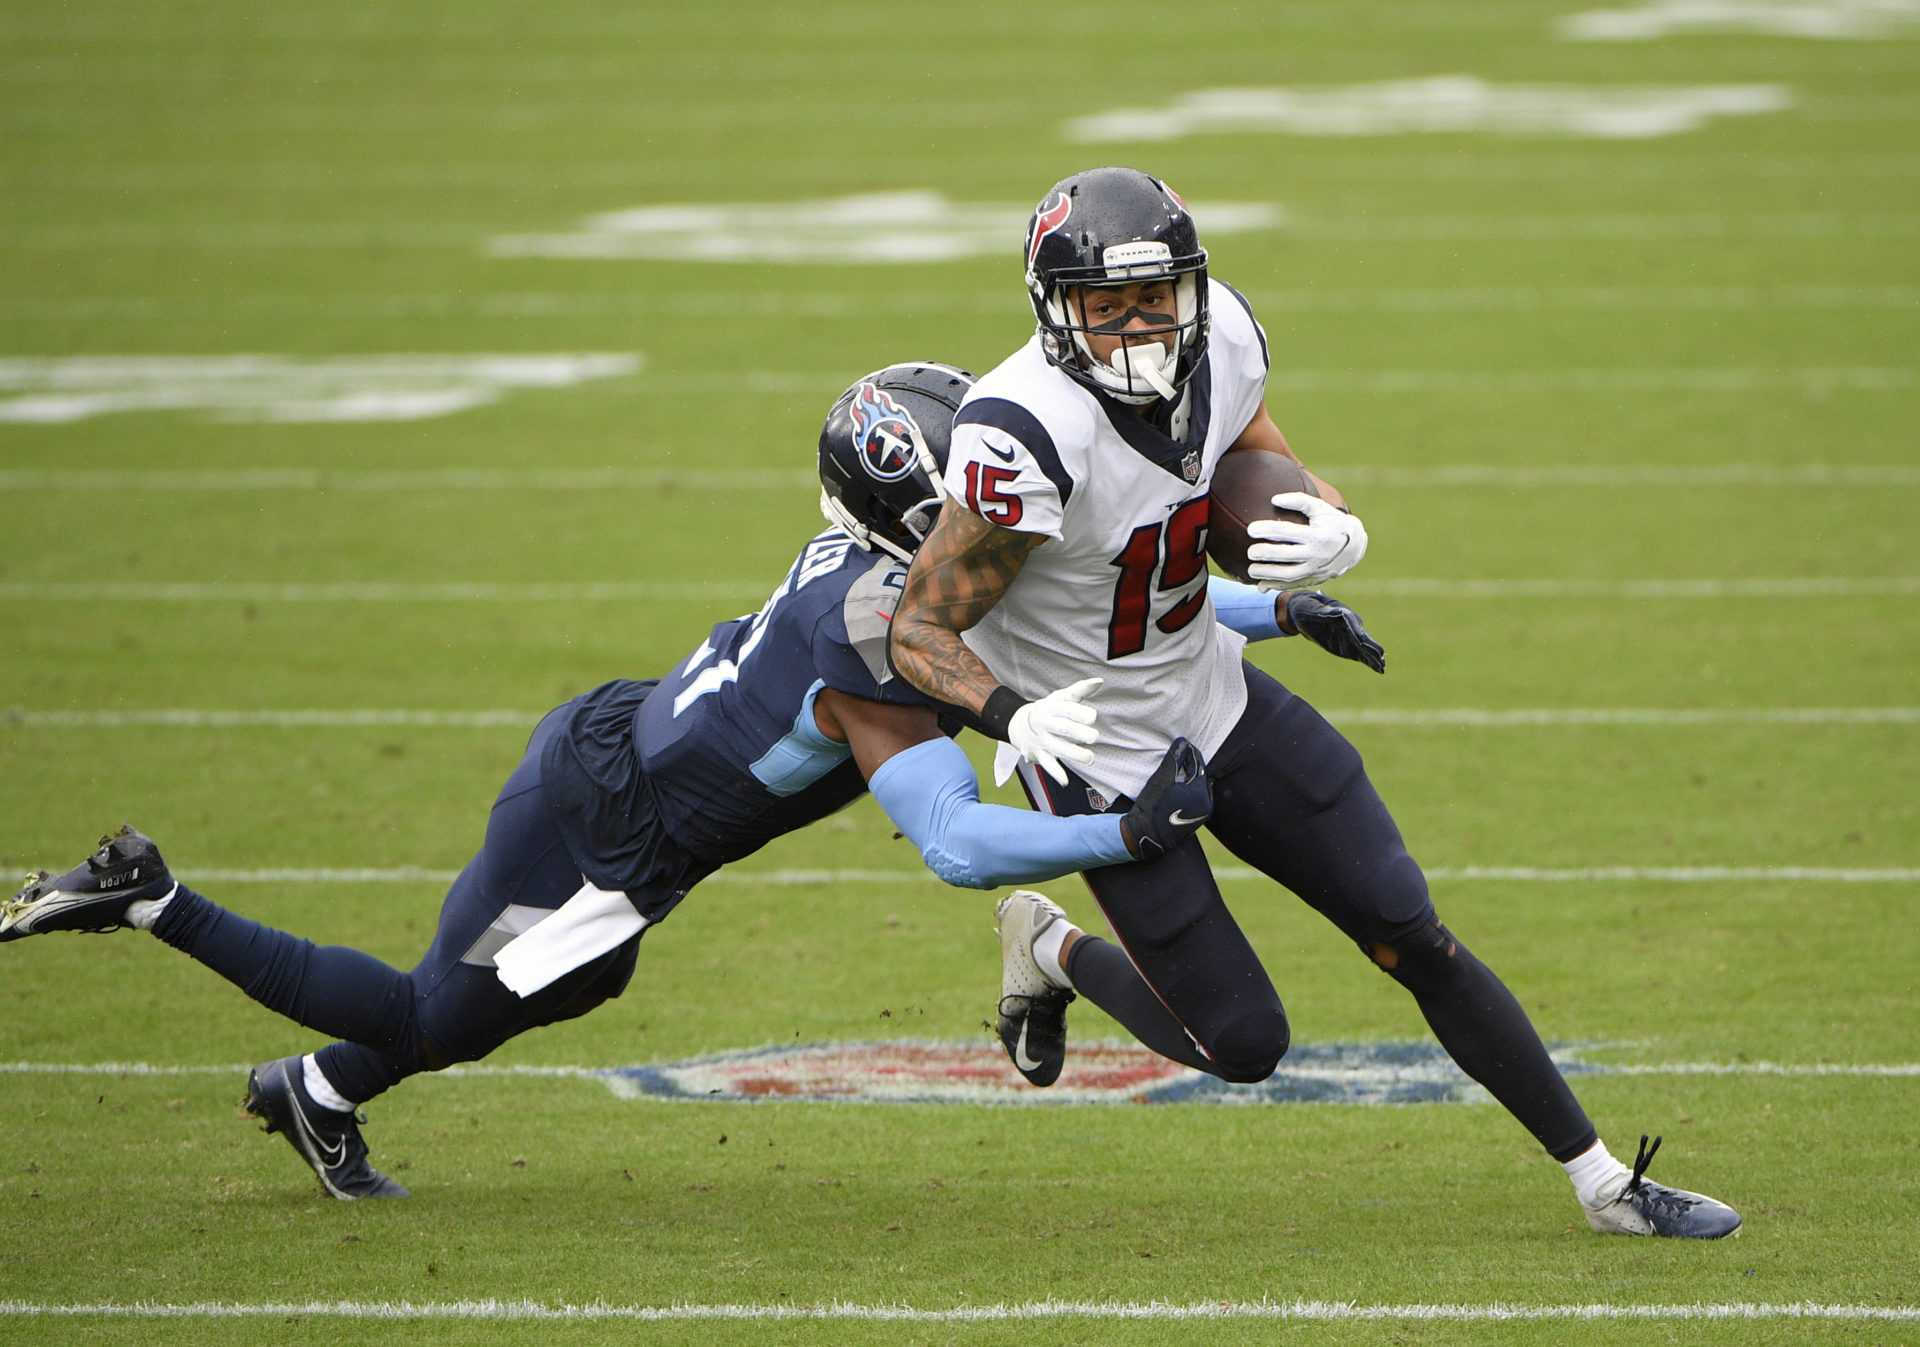 NFL Trade Rumors: Green Bay Packers to Move for Texans 'Will Fuller?